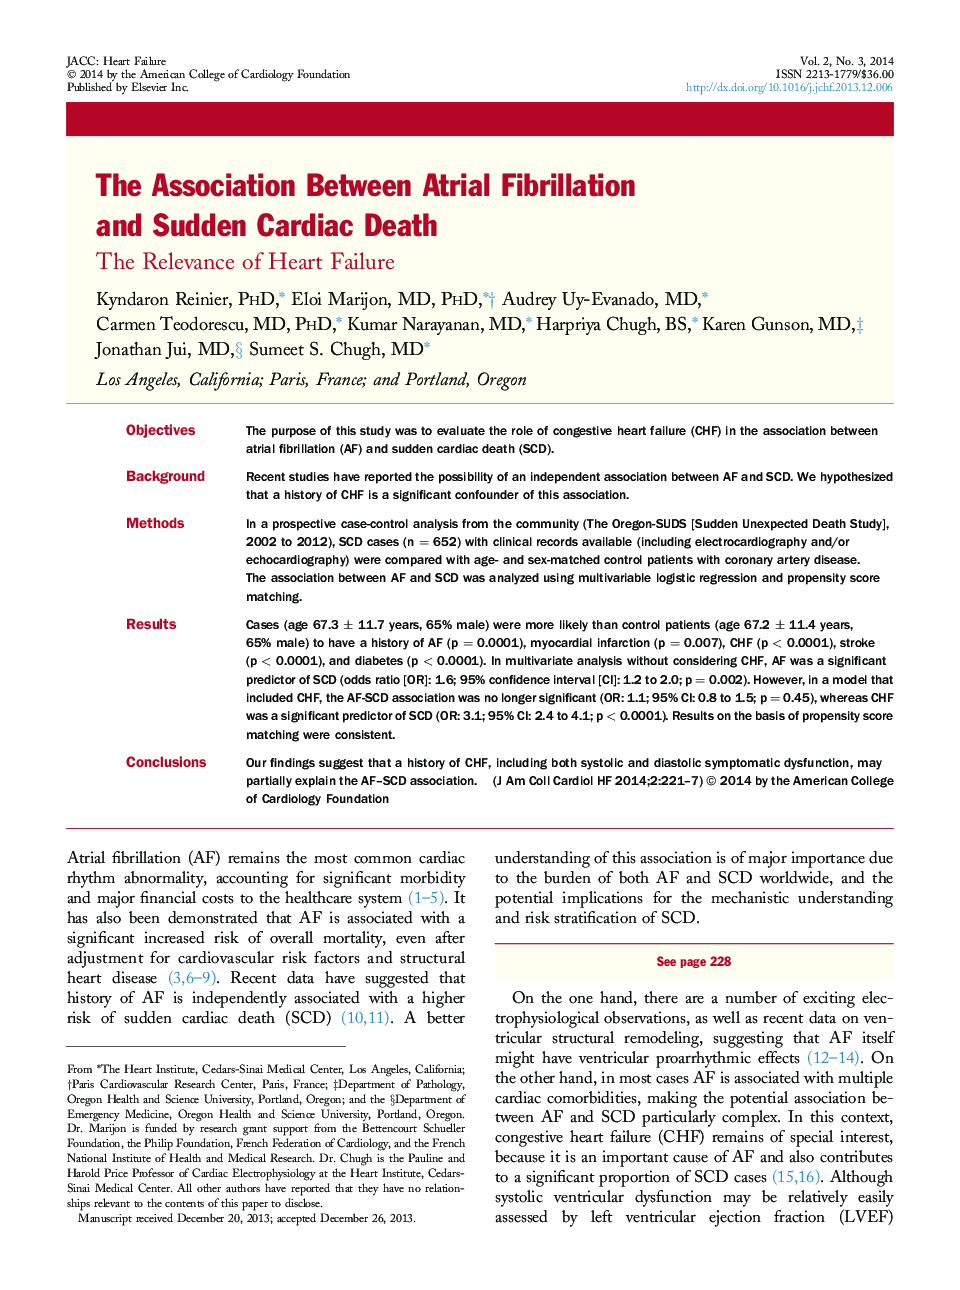 The Association Between Atrial Fibrillation and Sudden Cardiac Death : The Relevance of Heart Failure